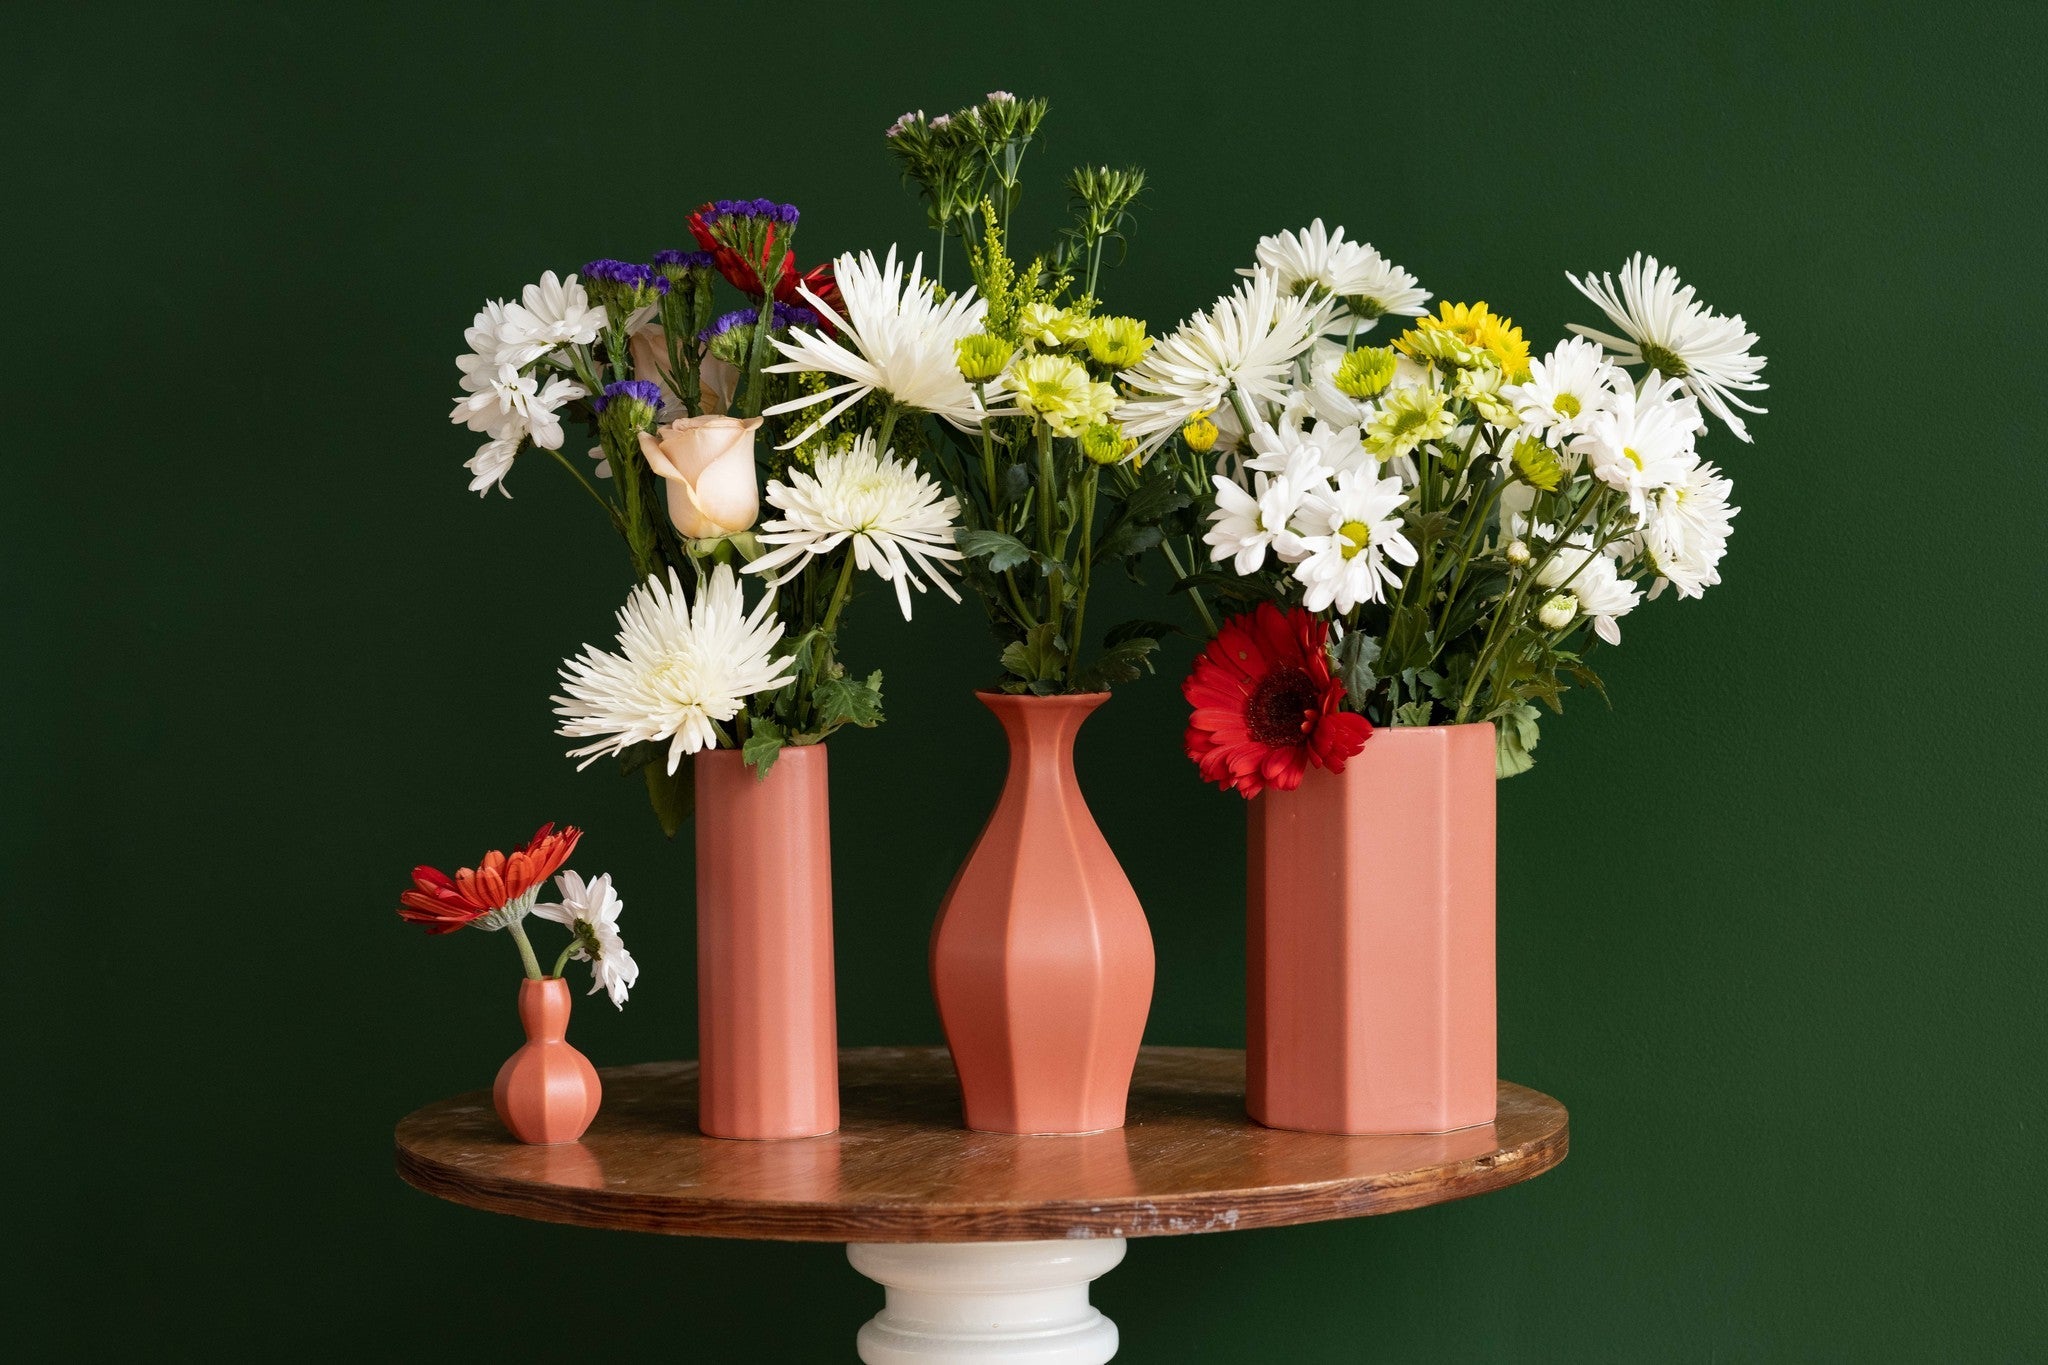 What Are The Benefits Of Ceramic Flower Vases? - The Bright Angle